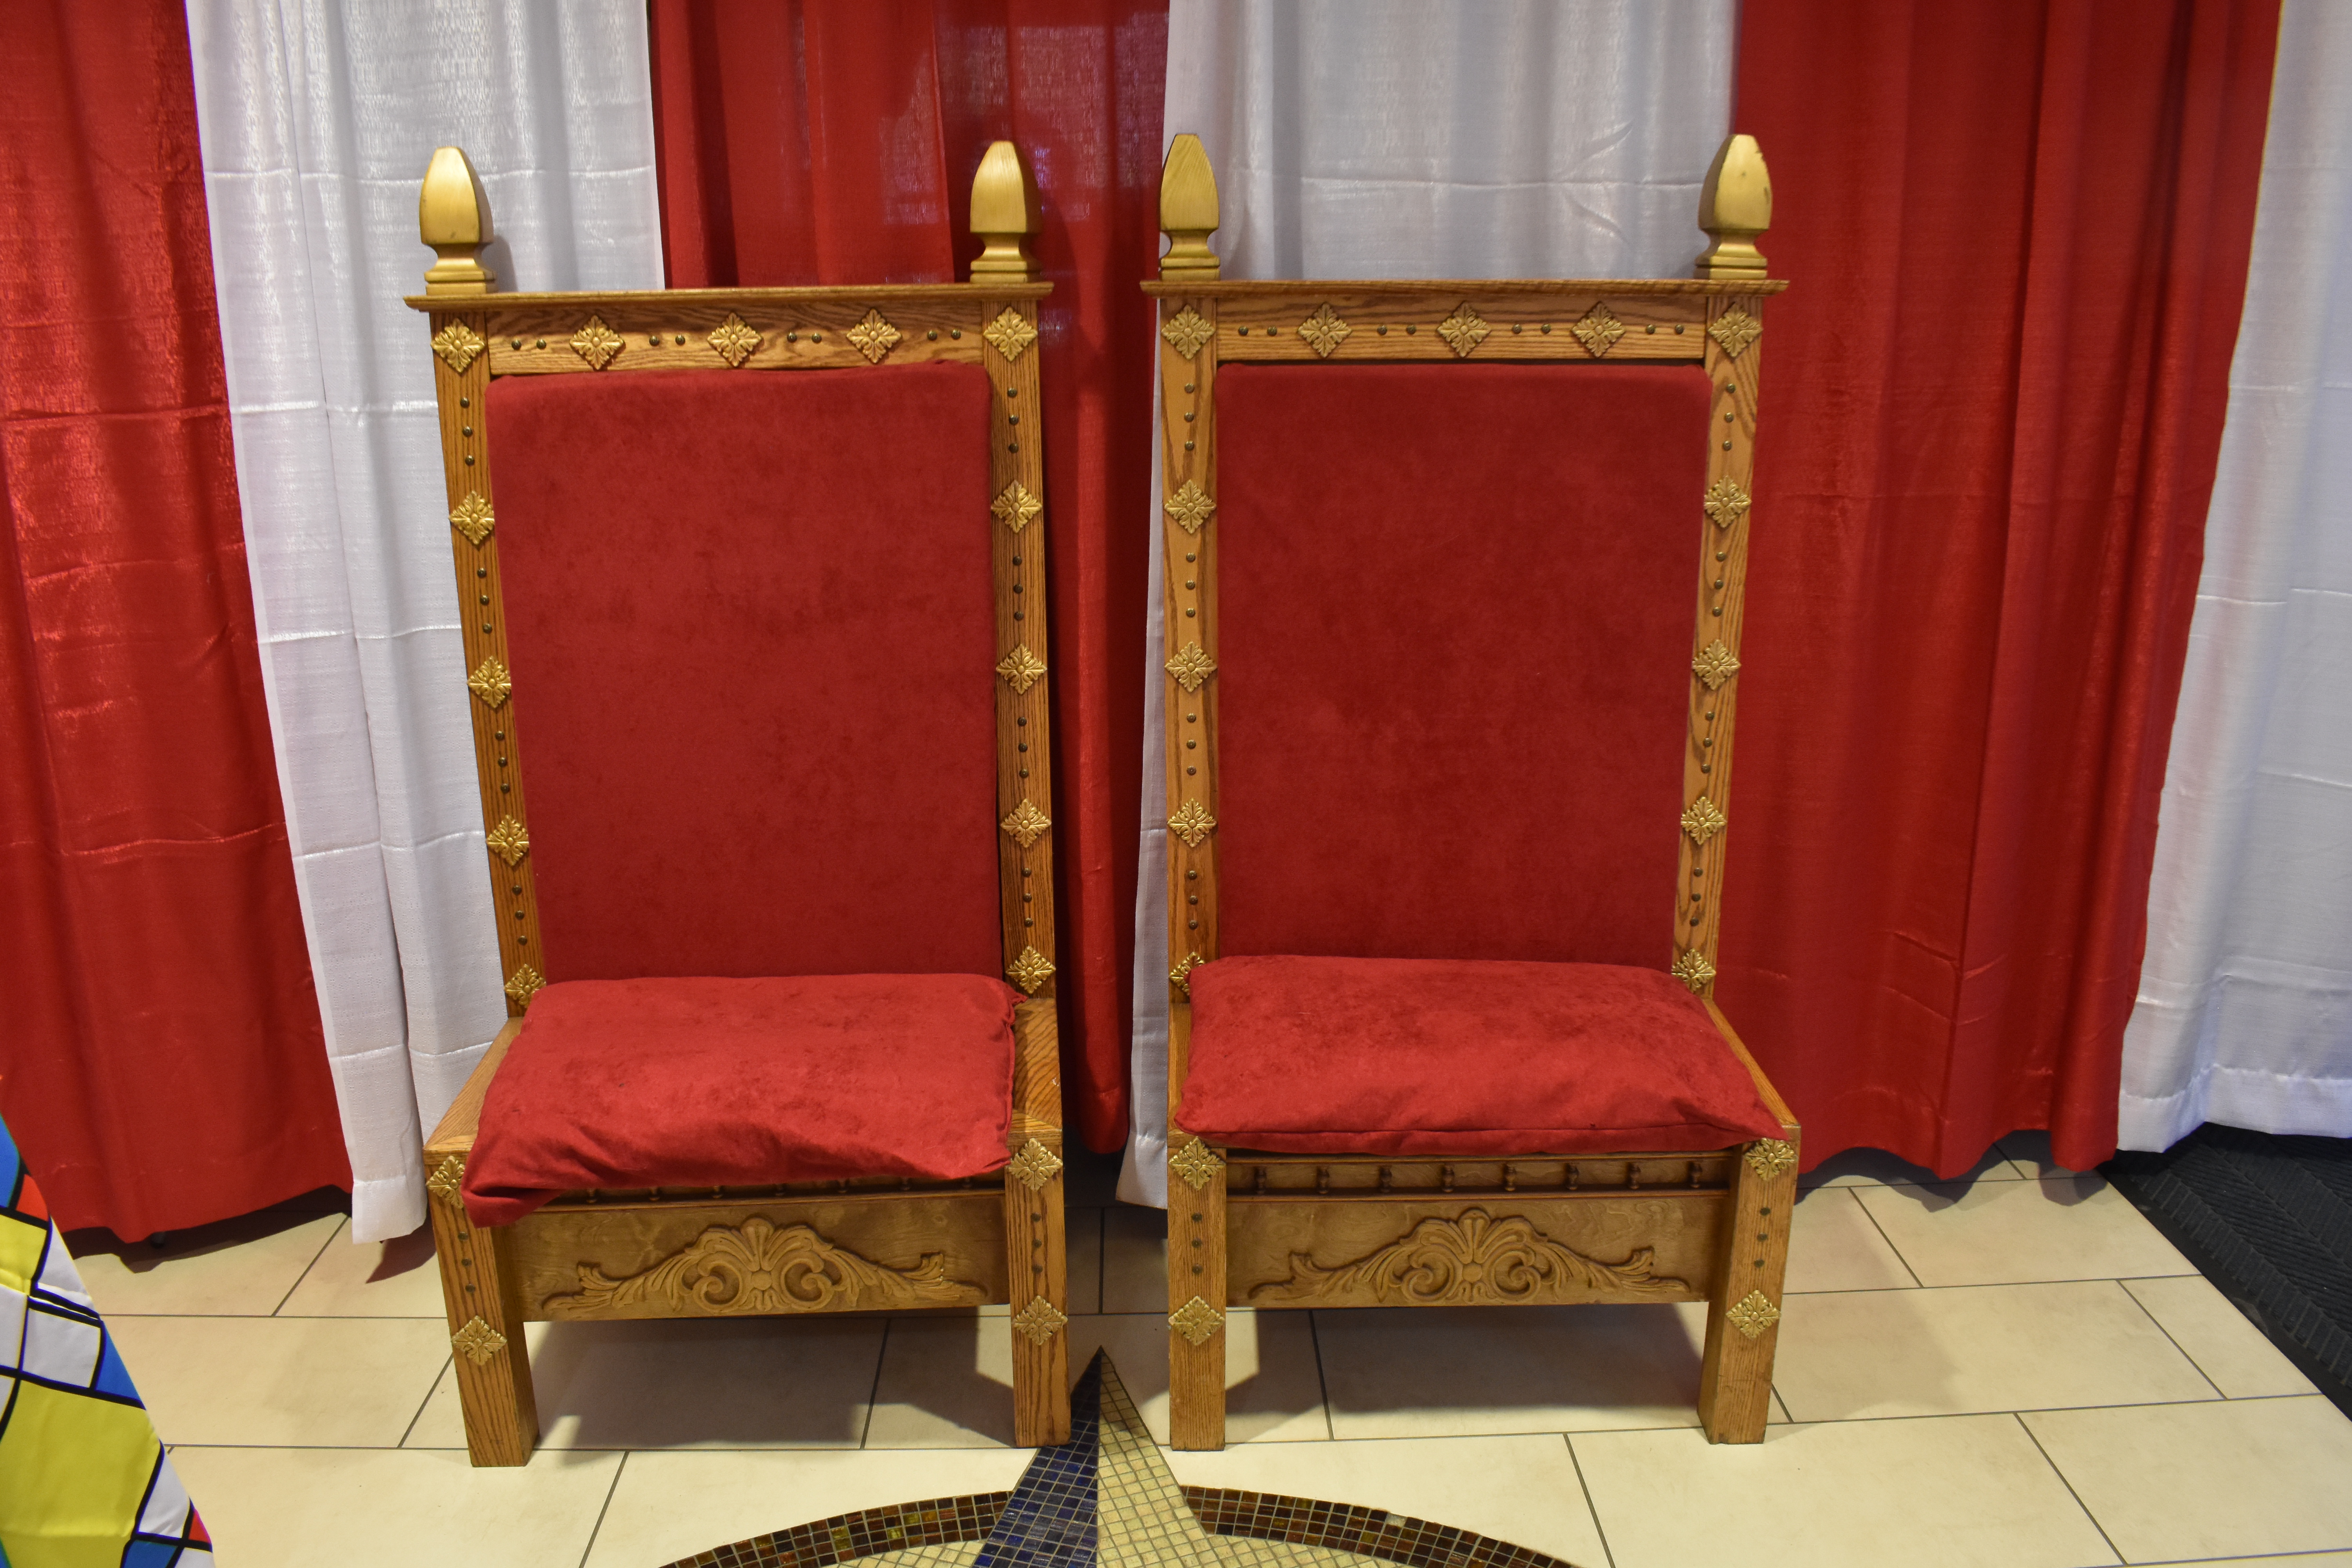 https://magicspecialevents.com/event-rentals/wp-content/uploads/Trinity-Episcopal-School-Prom-Throne-Chair-Red-4.jpg